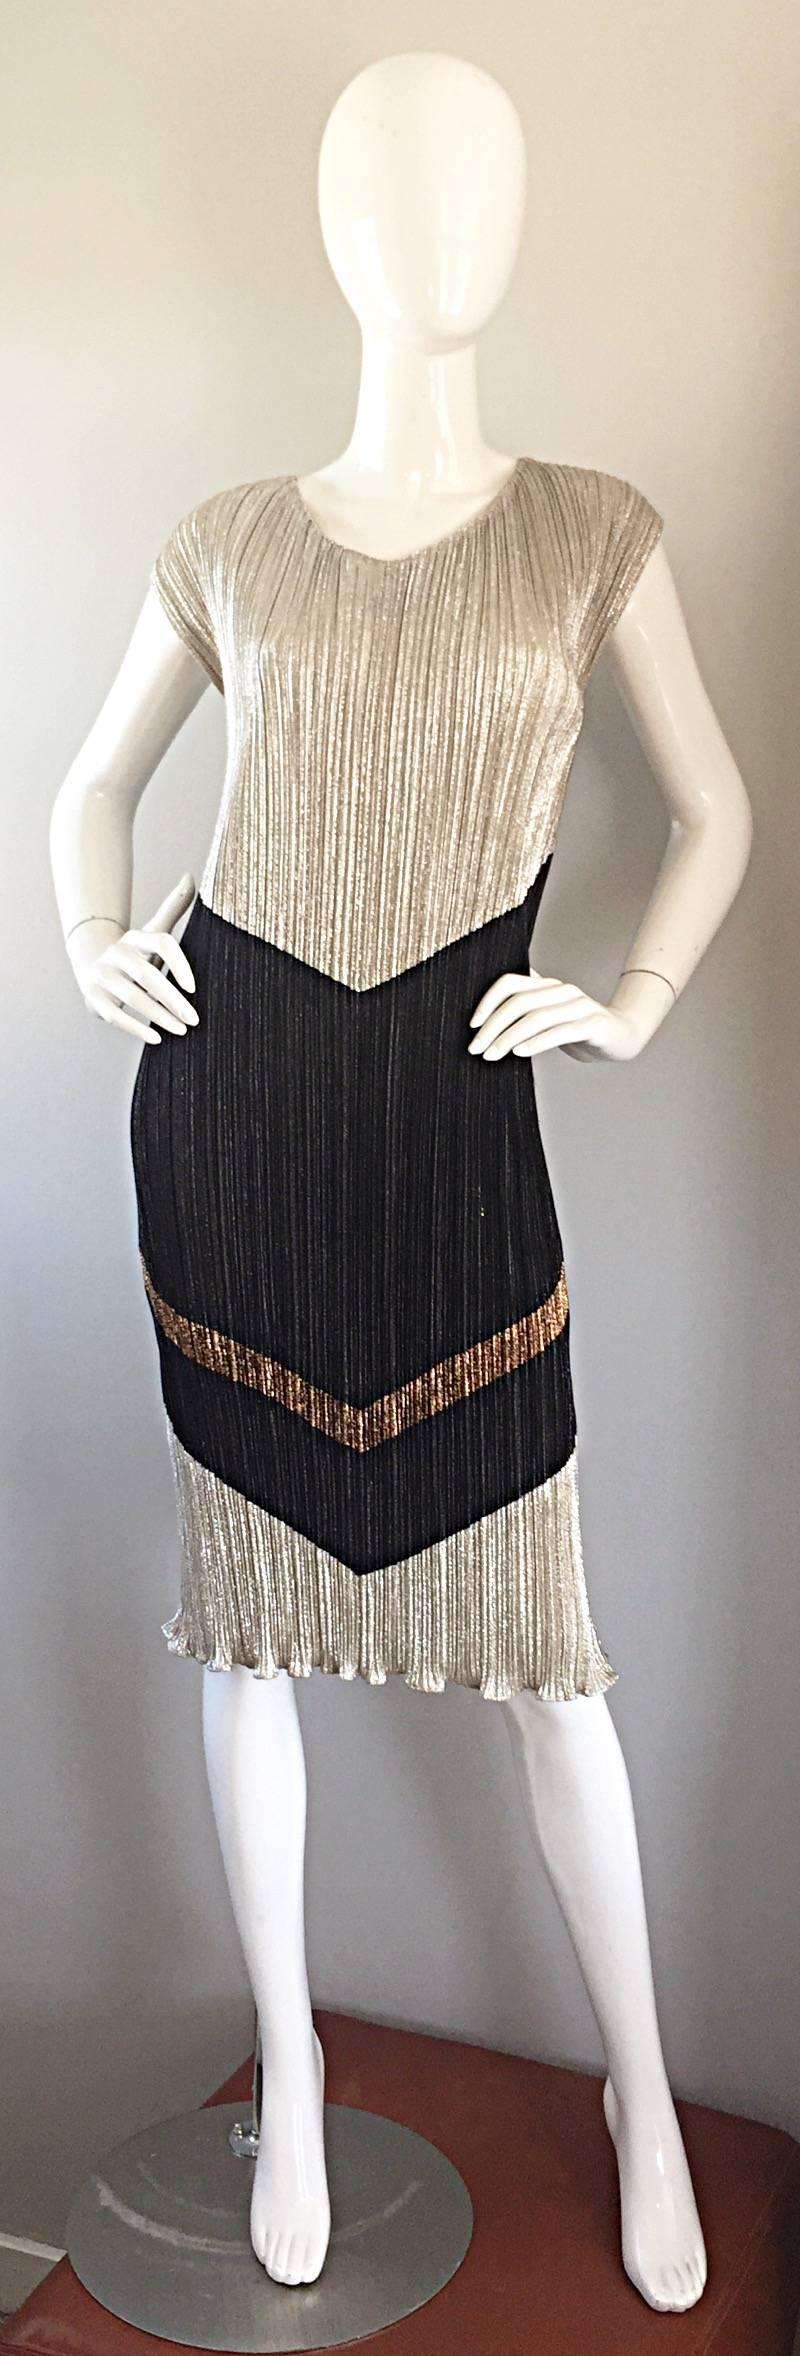 Incredible vintage SAMIR 70s does 20s color block metallic plisse flapper dress! Features geometric color blocks in white gold / silver, black, and bronze on the front and back. Classic 1920 silhouette in an art deco print. All over plisse pleating